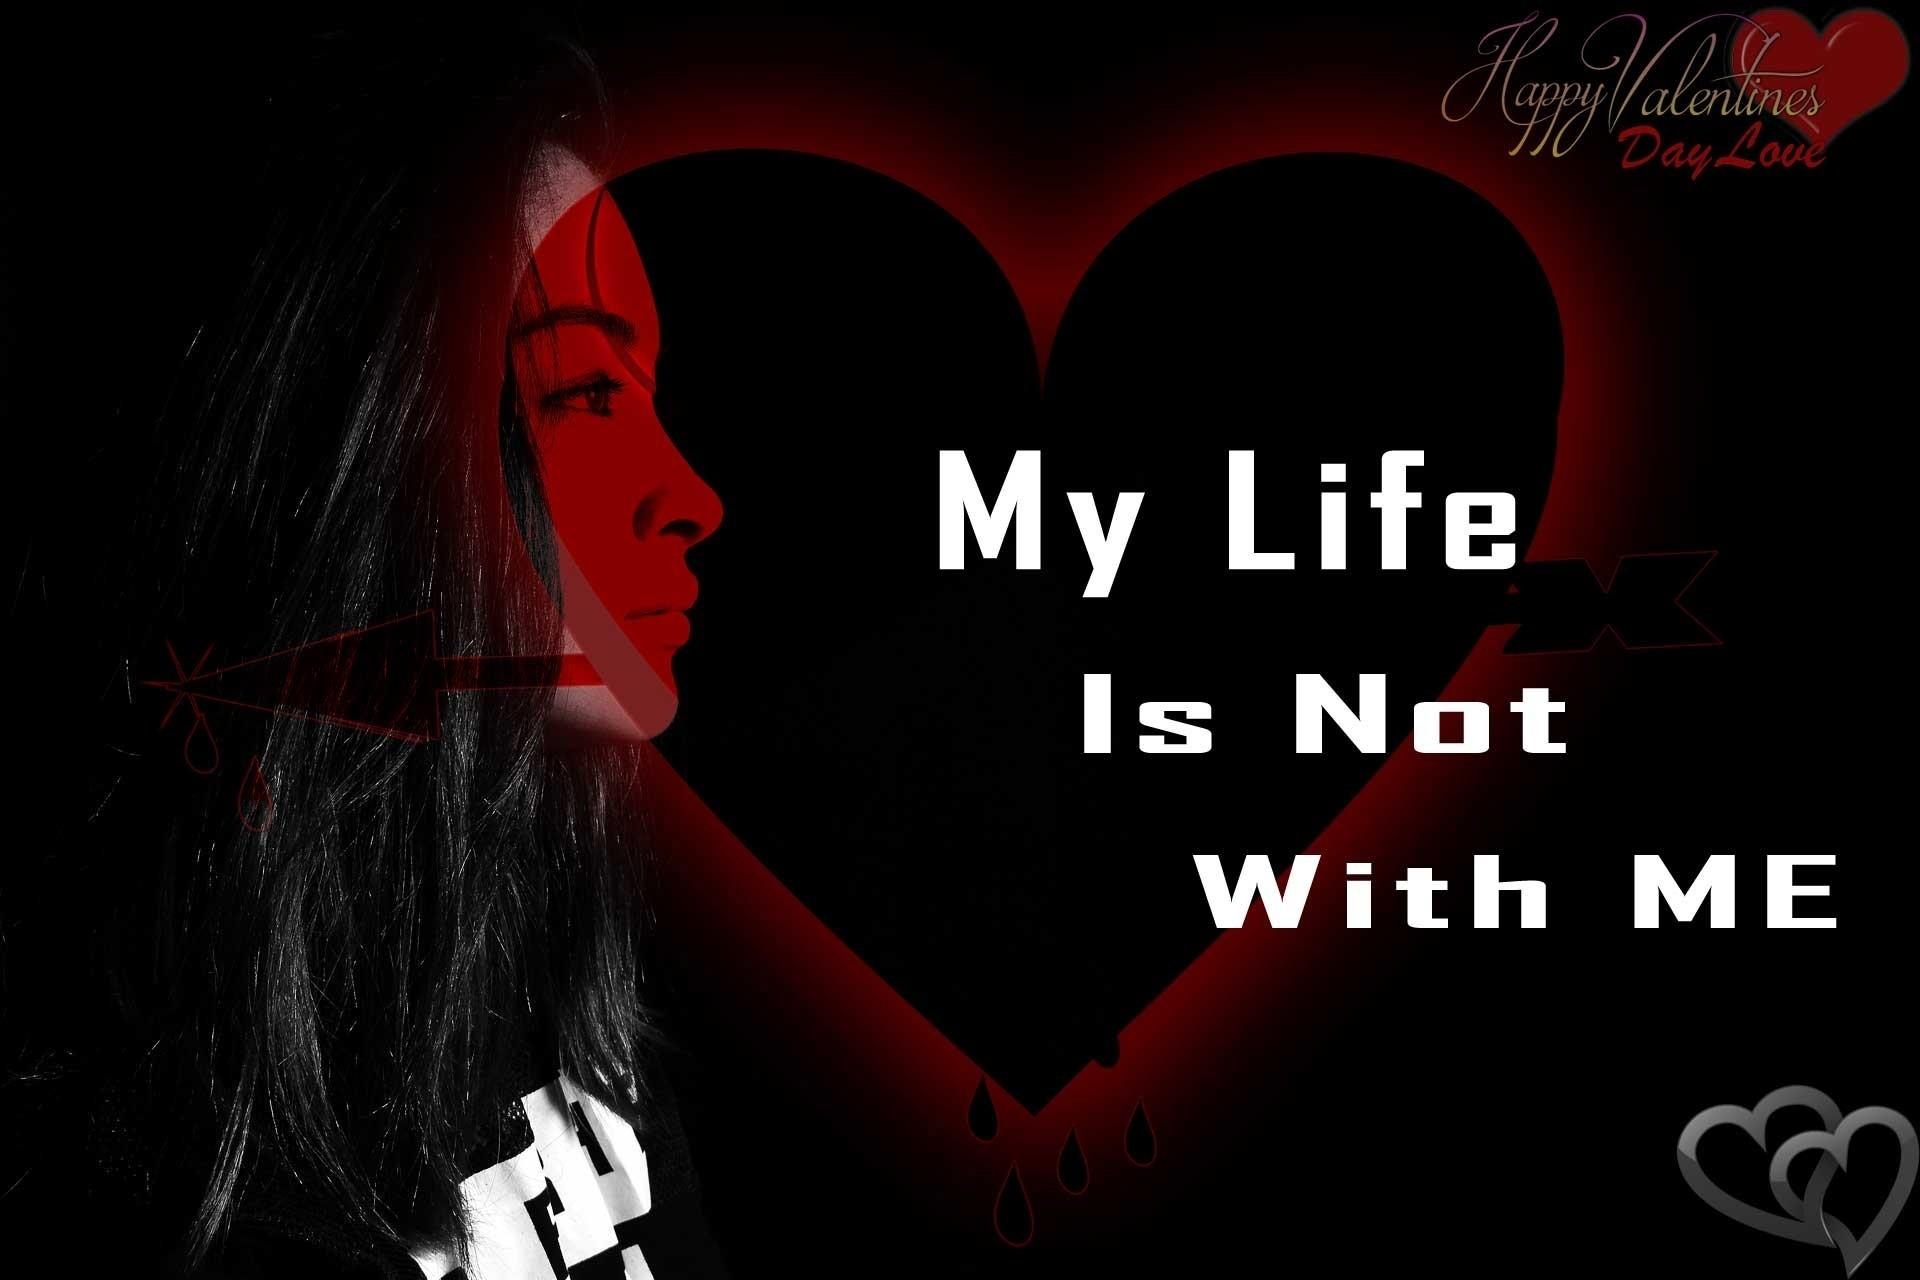 hate my life wallpapers